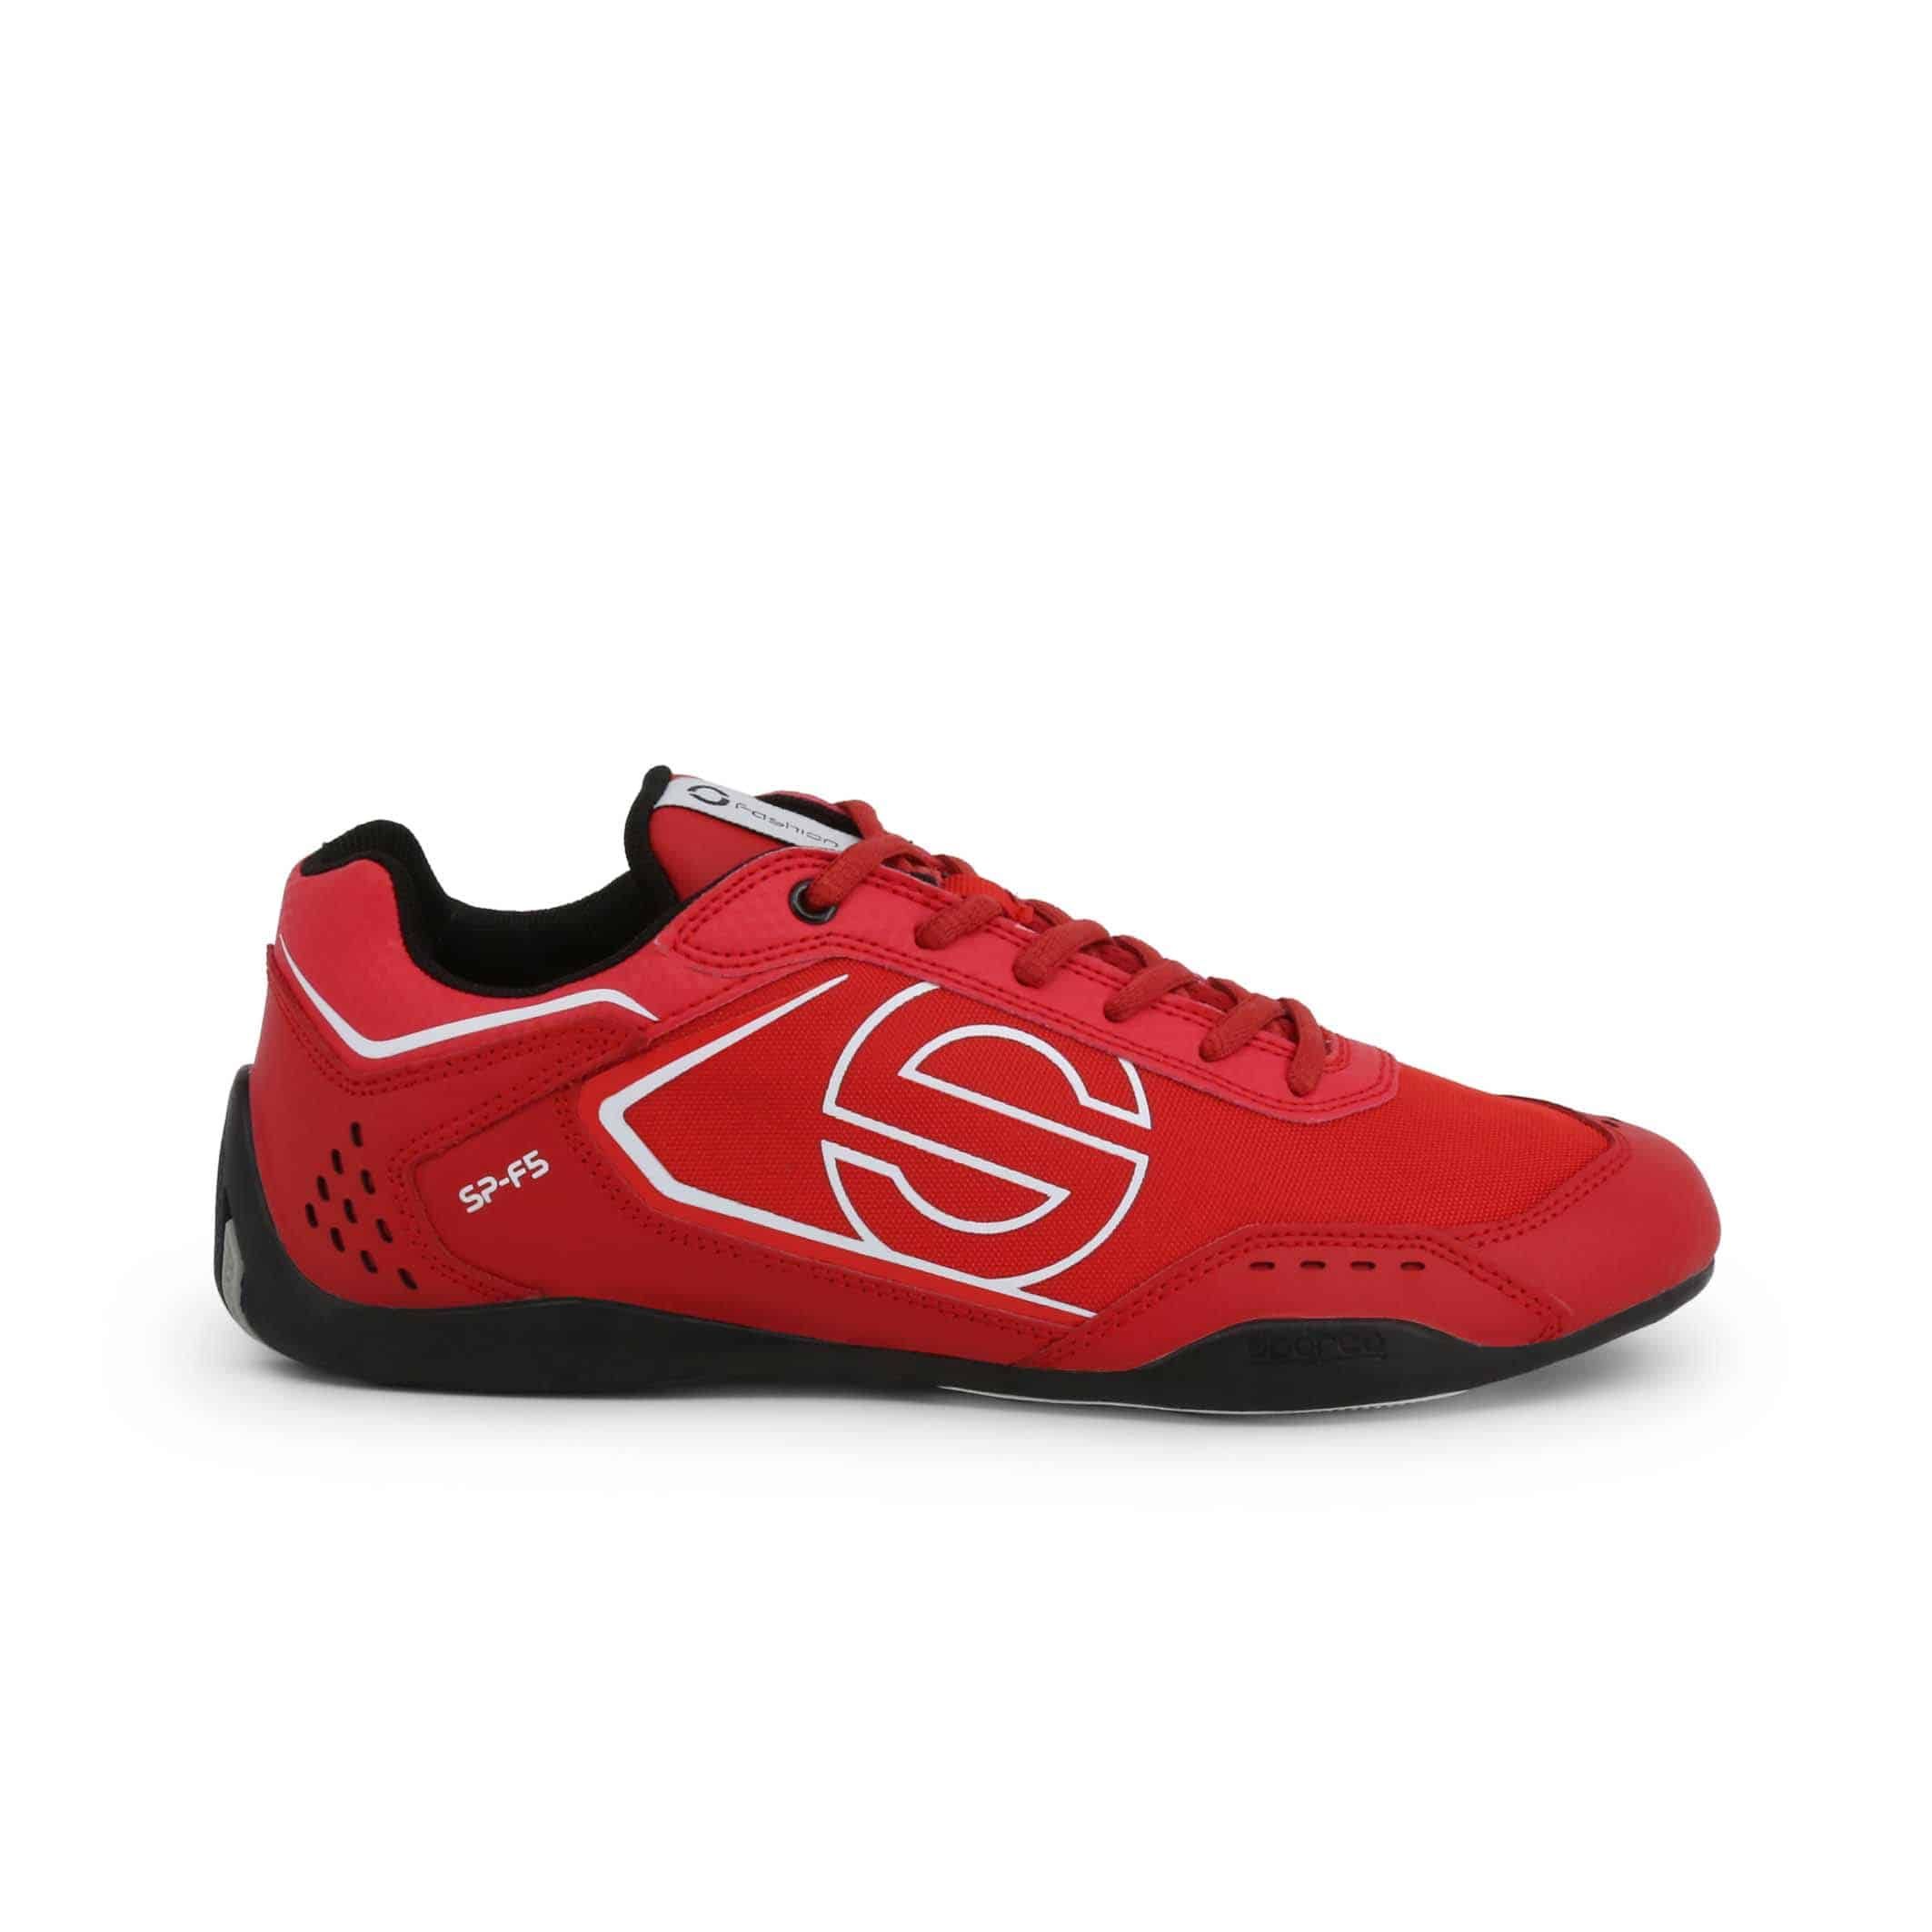 Sparco SP-F5 Red Shoes Sneakers in Leather » Sparco Fashion AU|NZ